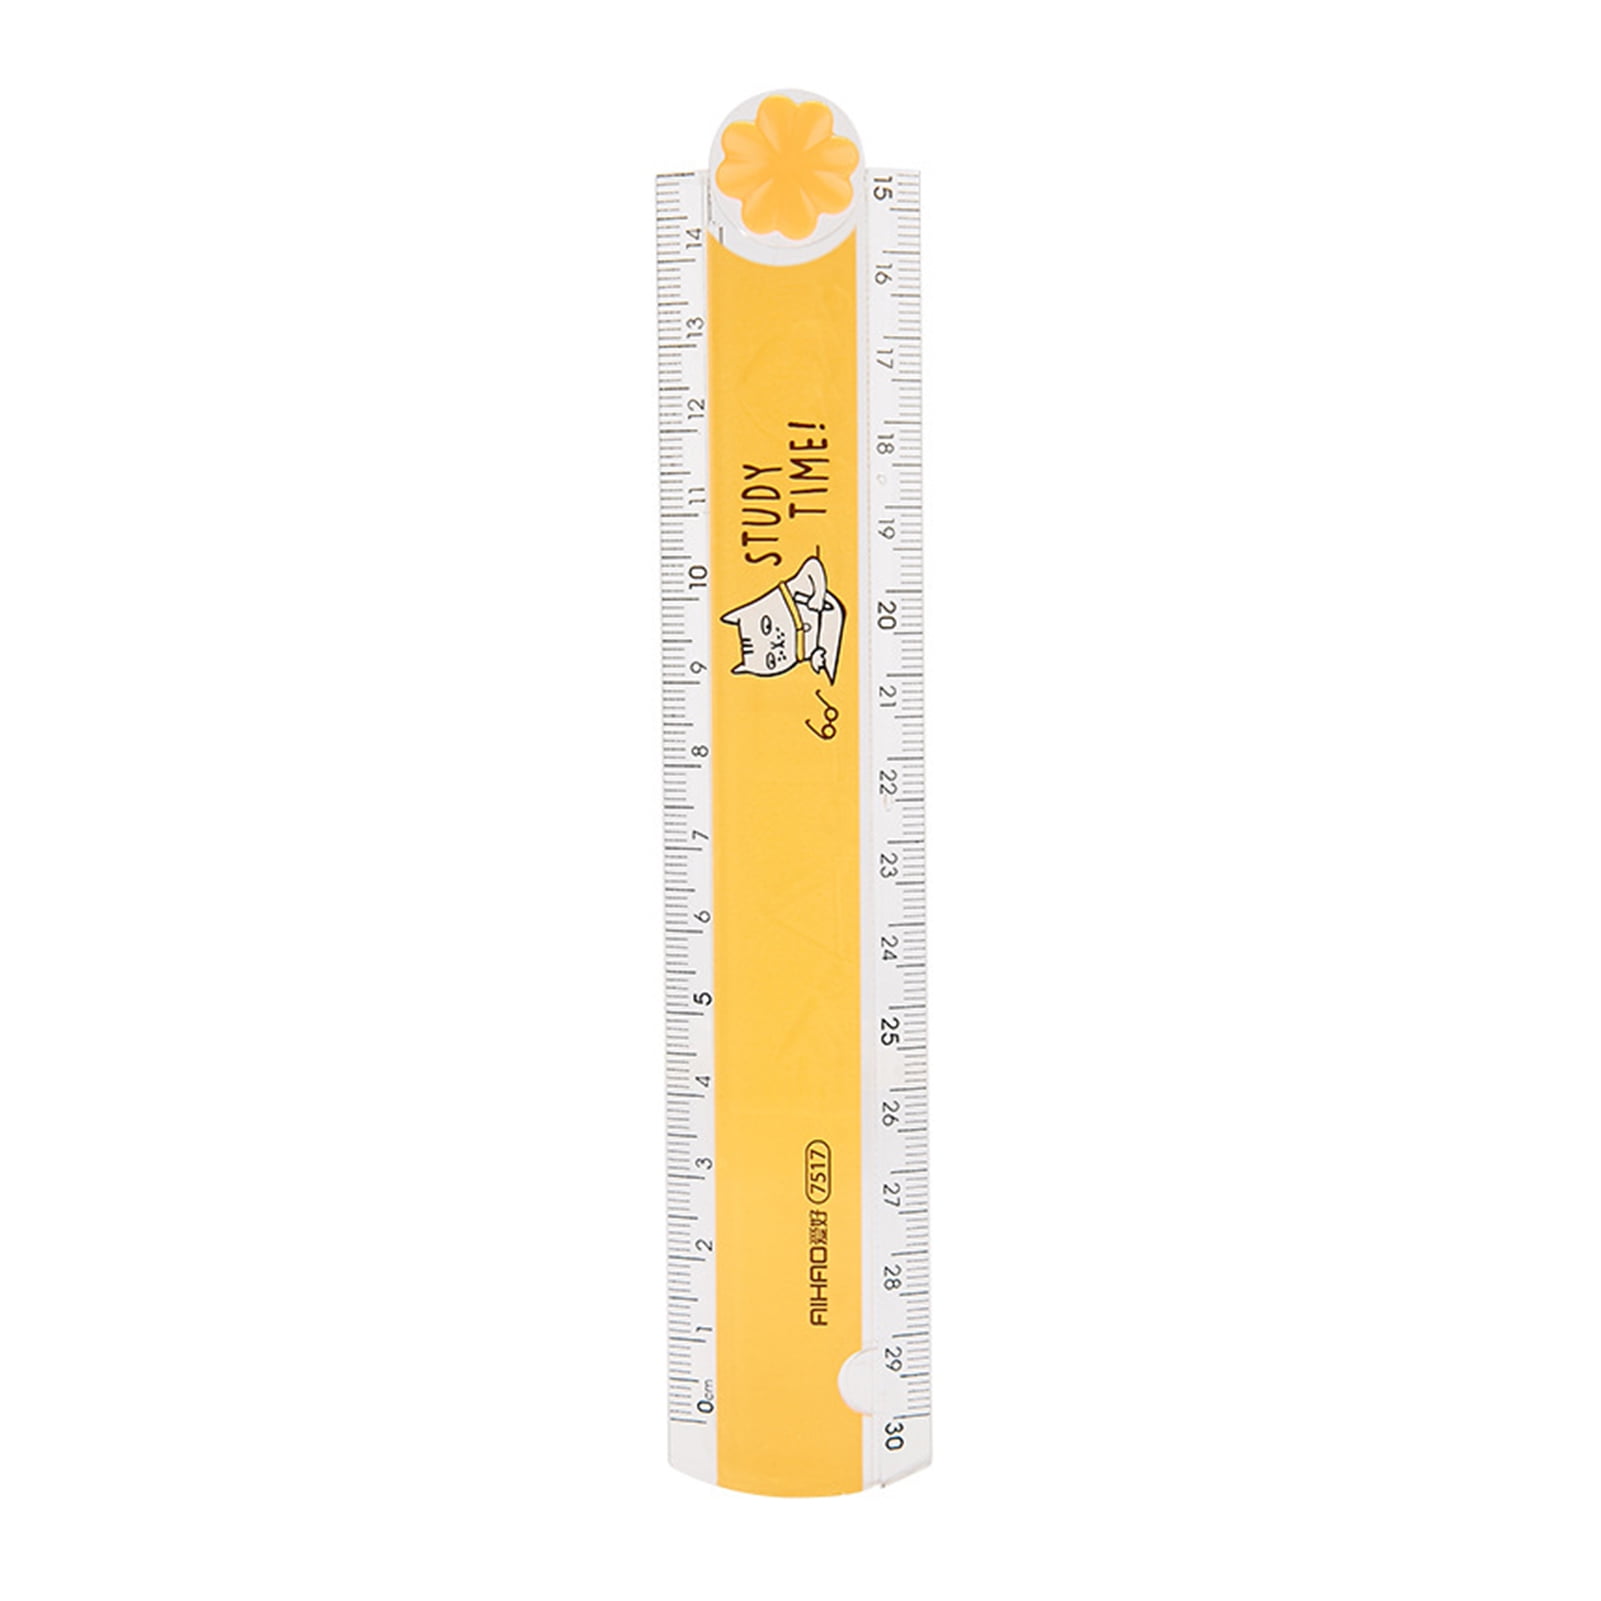 OIAGLH 6pcs 30cm Inches Centimeters Plastic Rulers Architects Translucent Smooth Home Students Straight Clear Coloor Random School